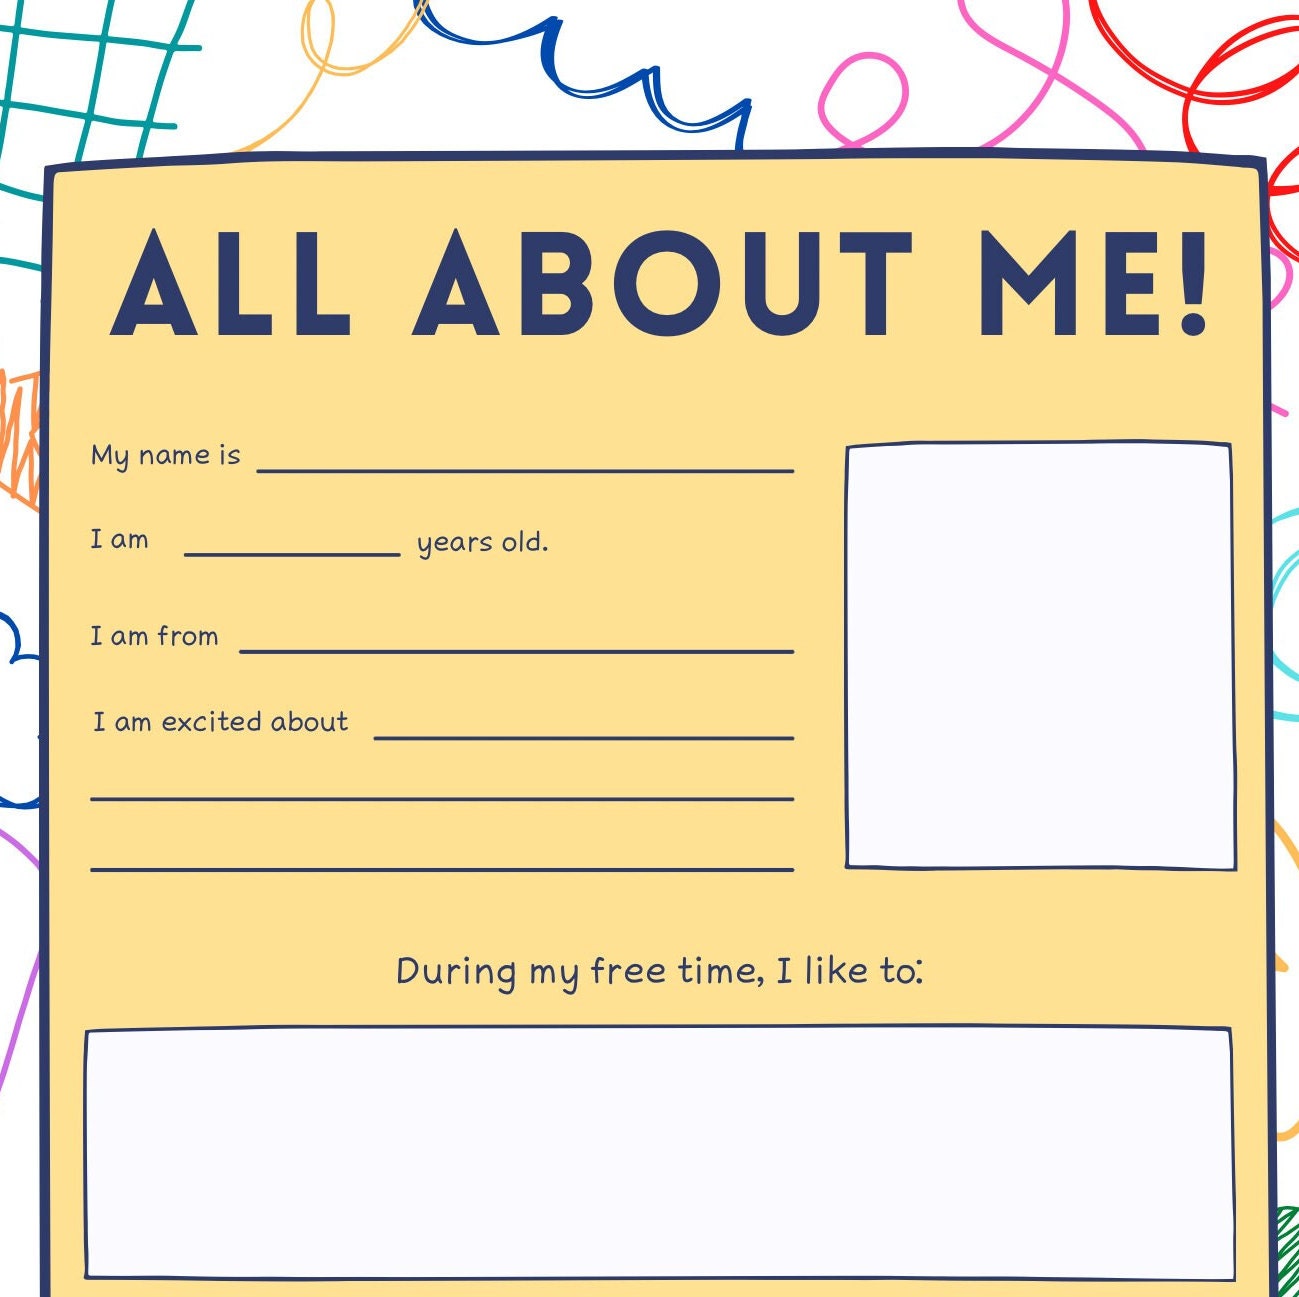 all-about-me-worksheet-for-kids-etsy